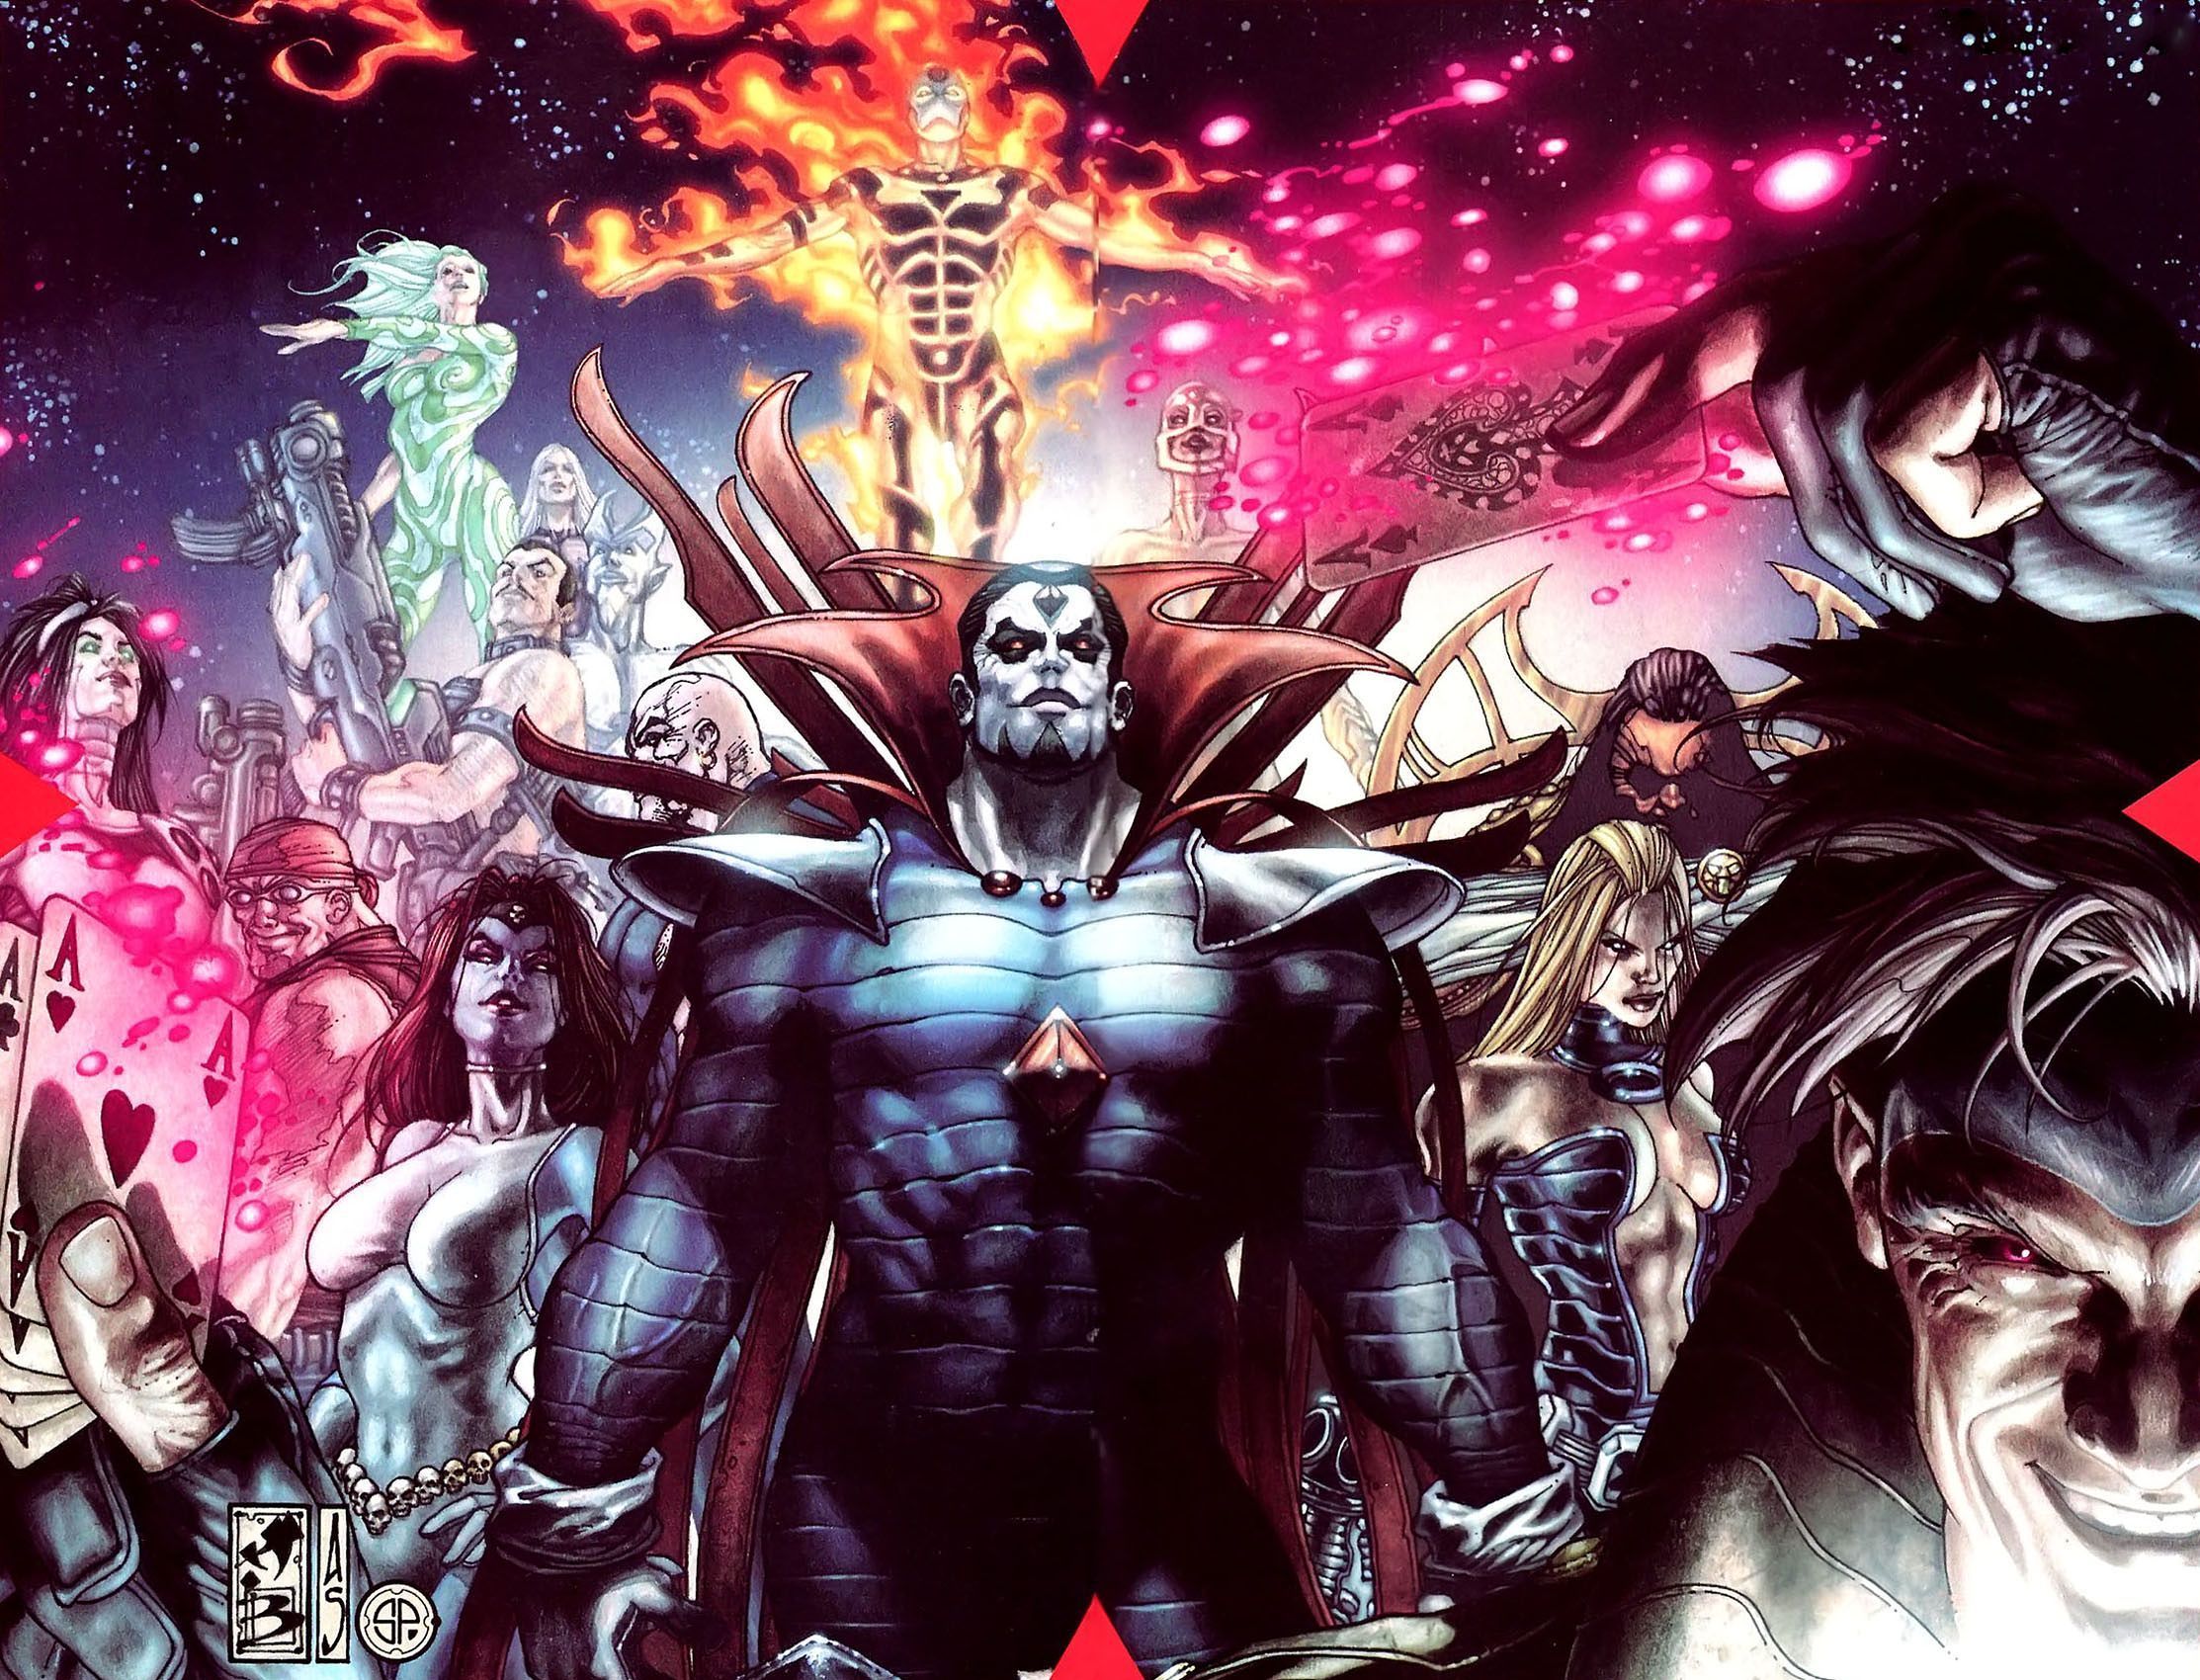 Mr. Sinister, Gambit and the Marauders